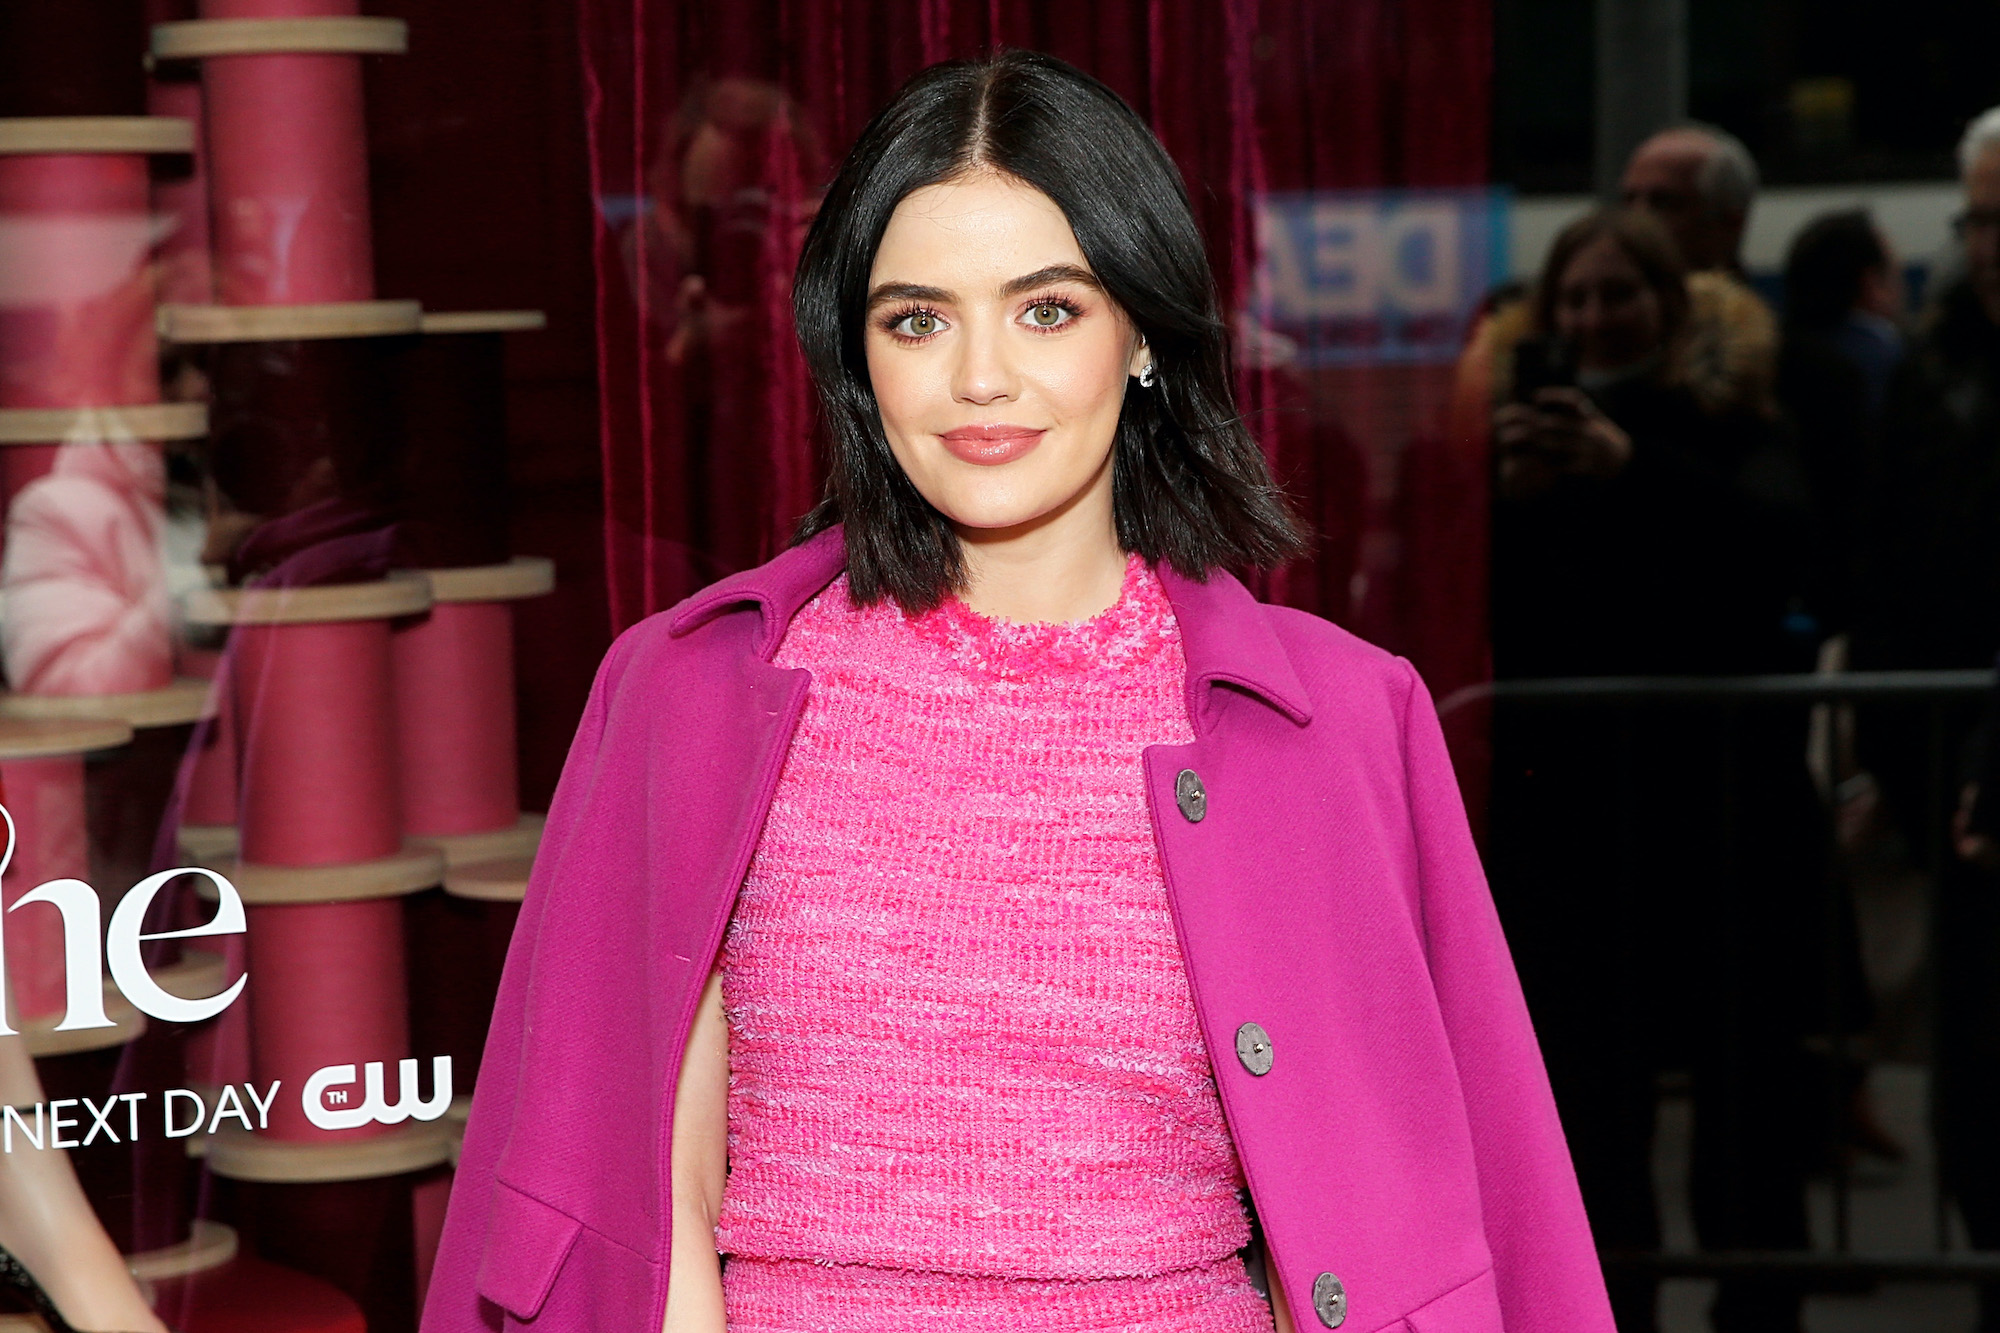 Lucy Hale smiling in front of a window display